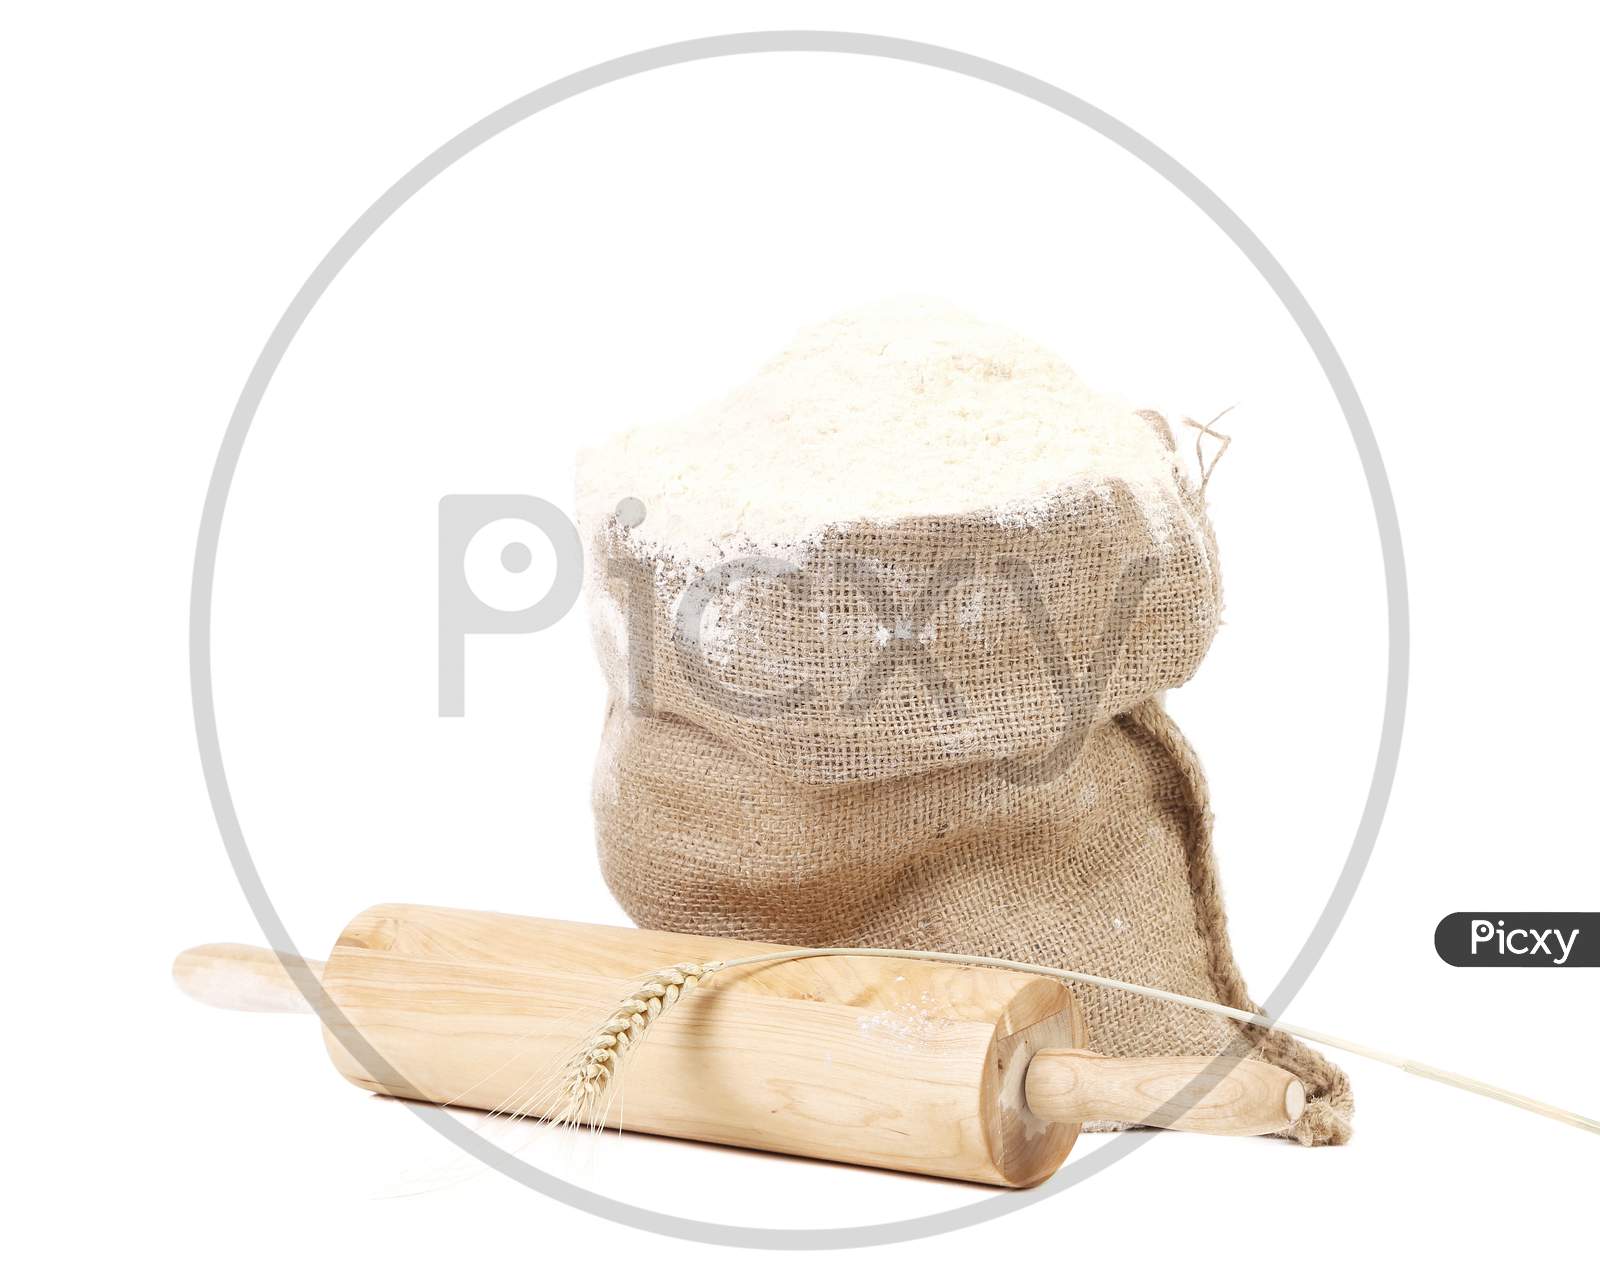 Composition Of Wheat Flour In Sack. Isolated On A White Background.